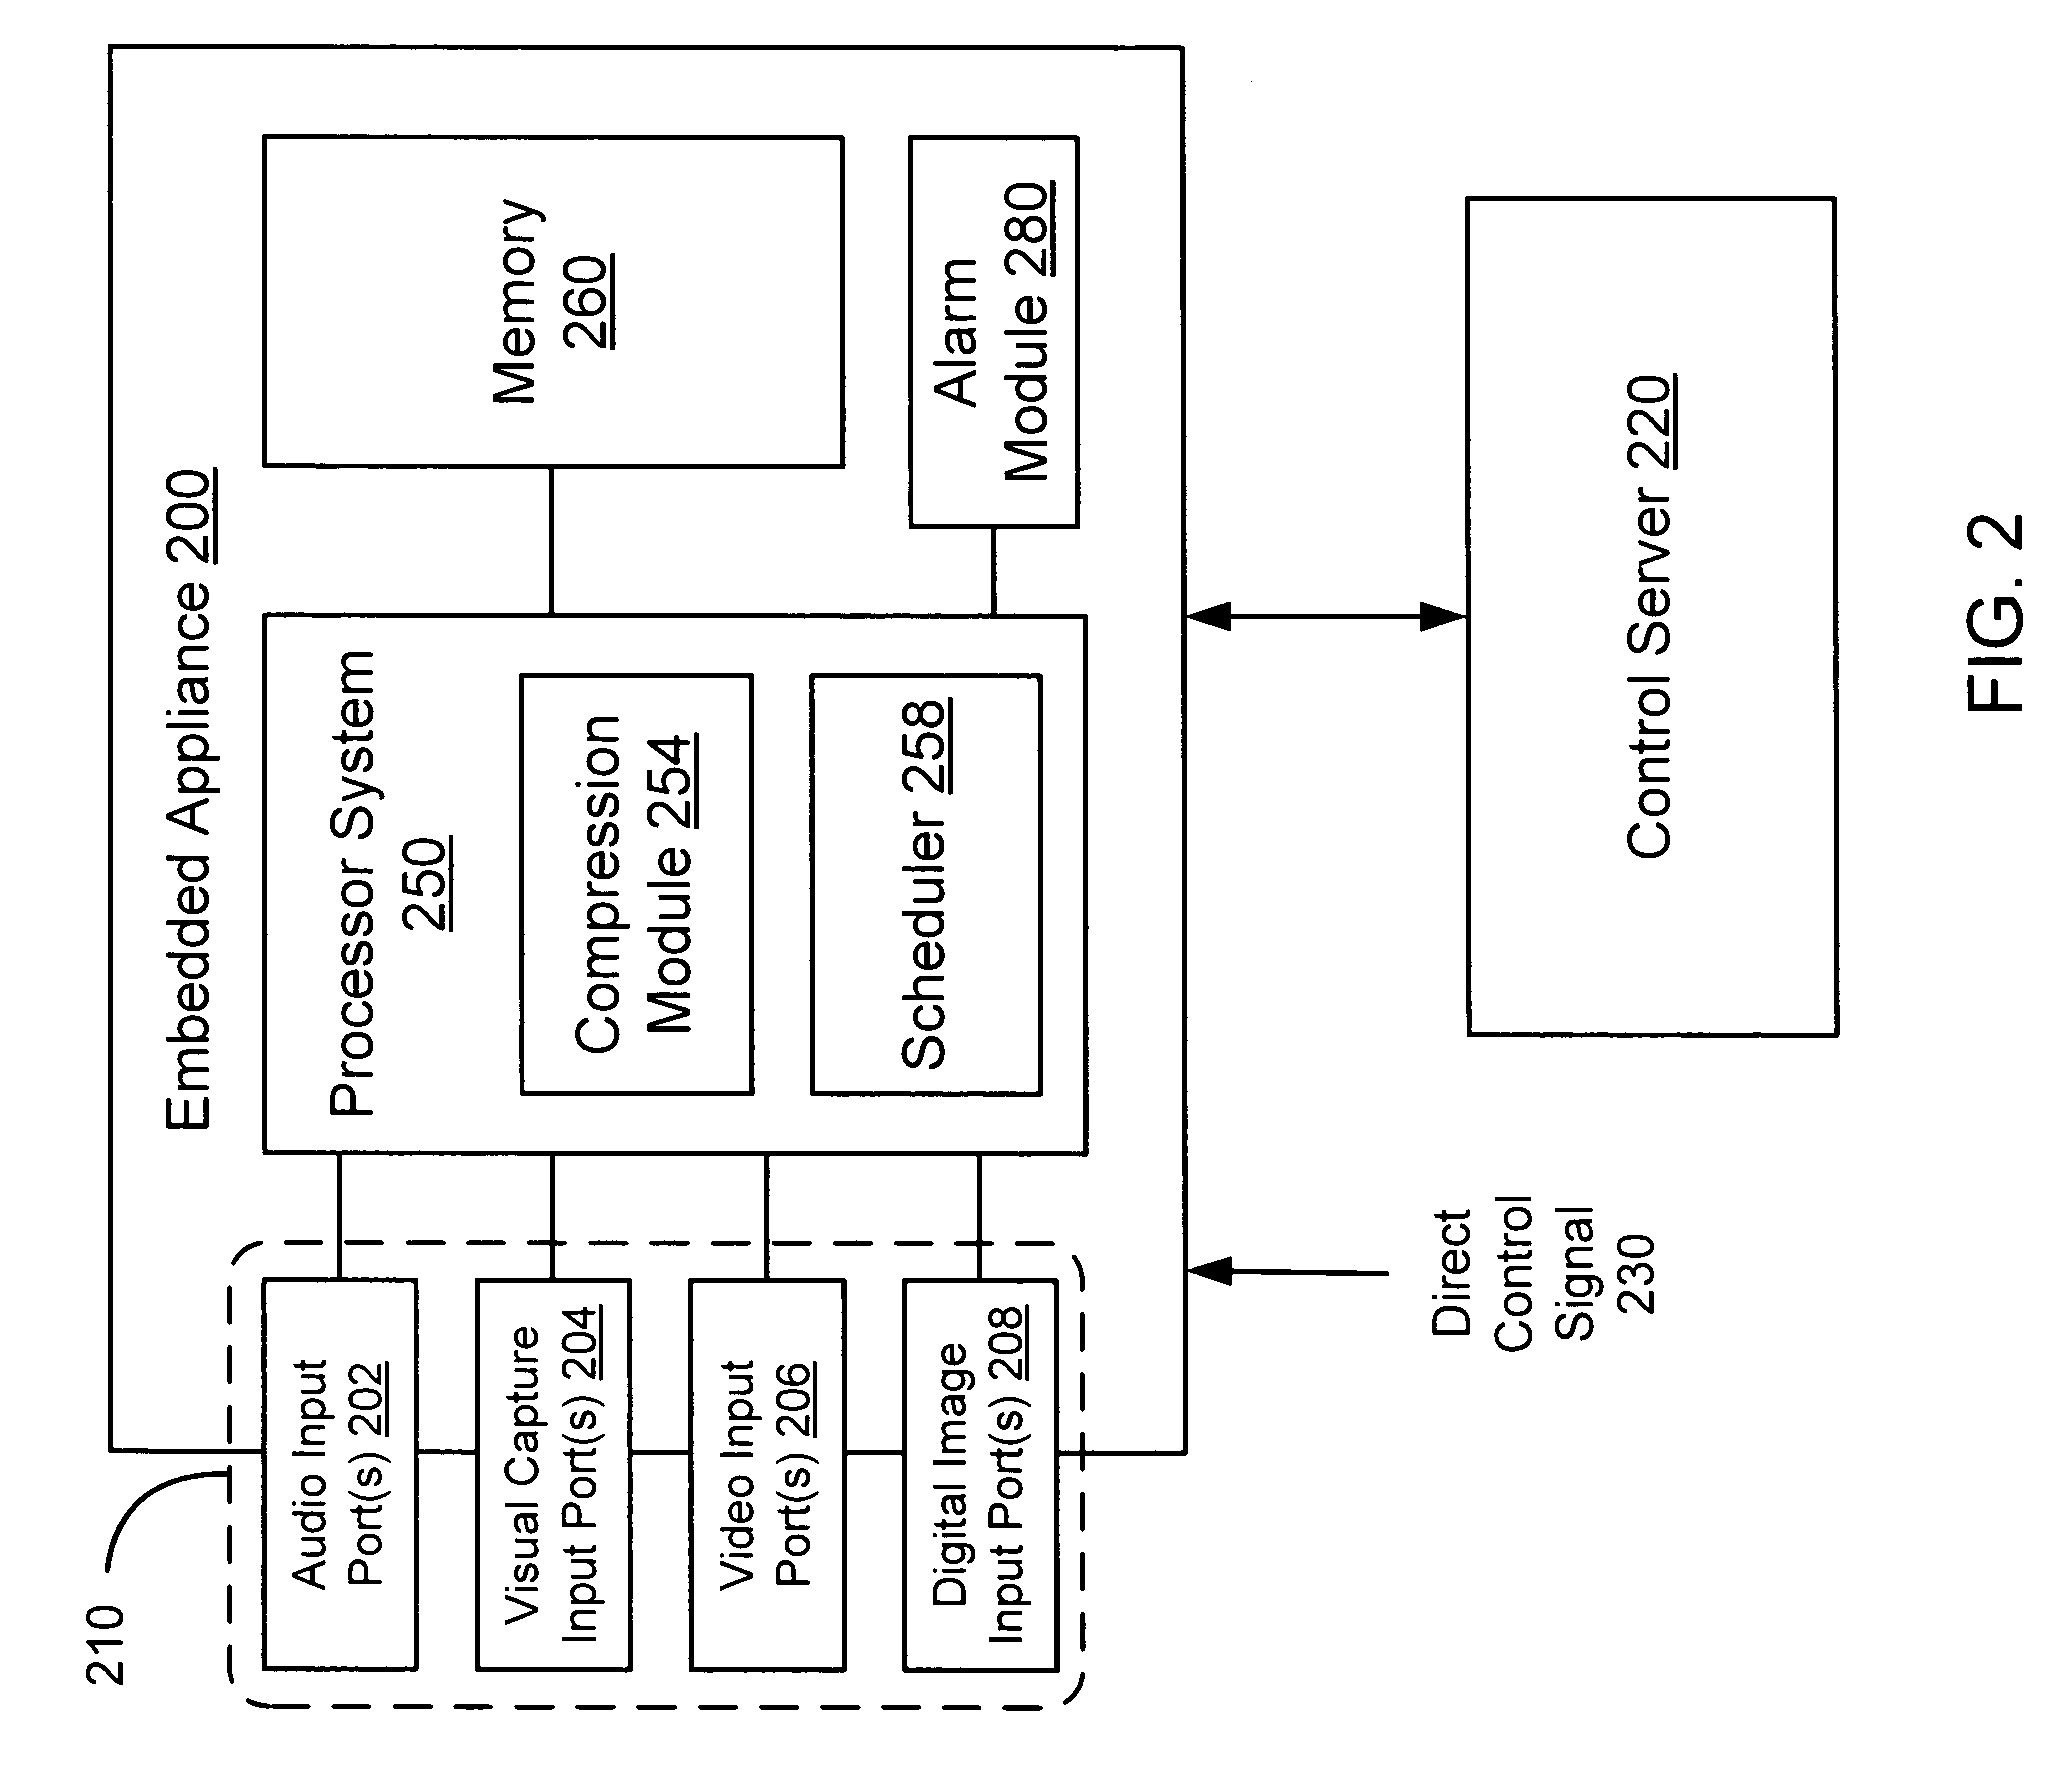 Embedded appliance for multimedia capture